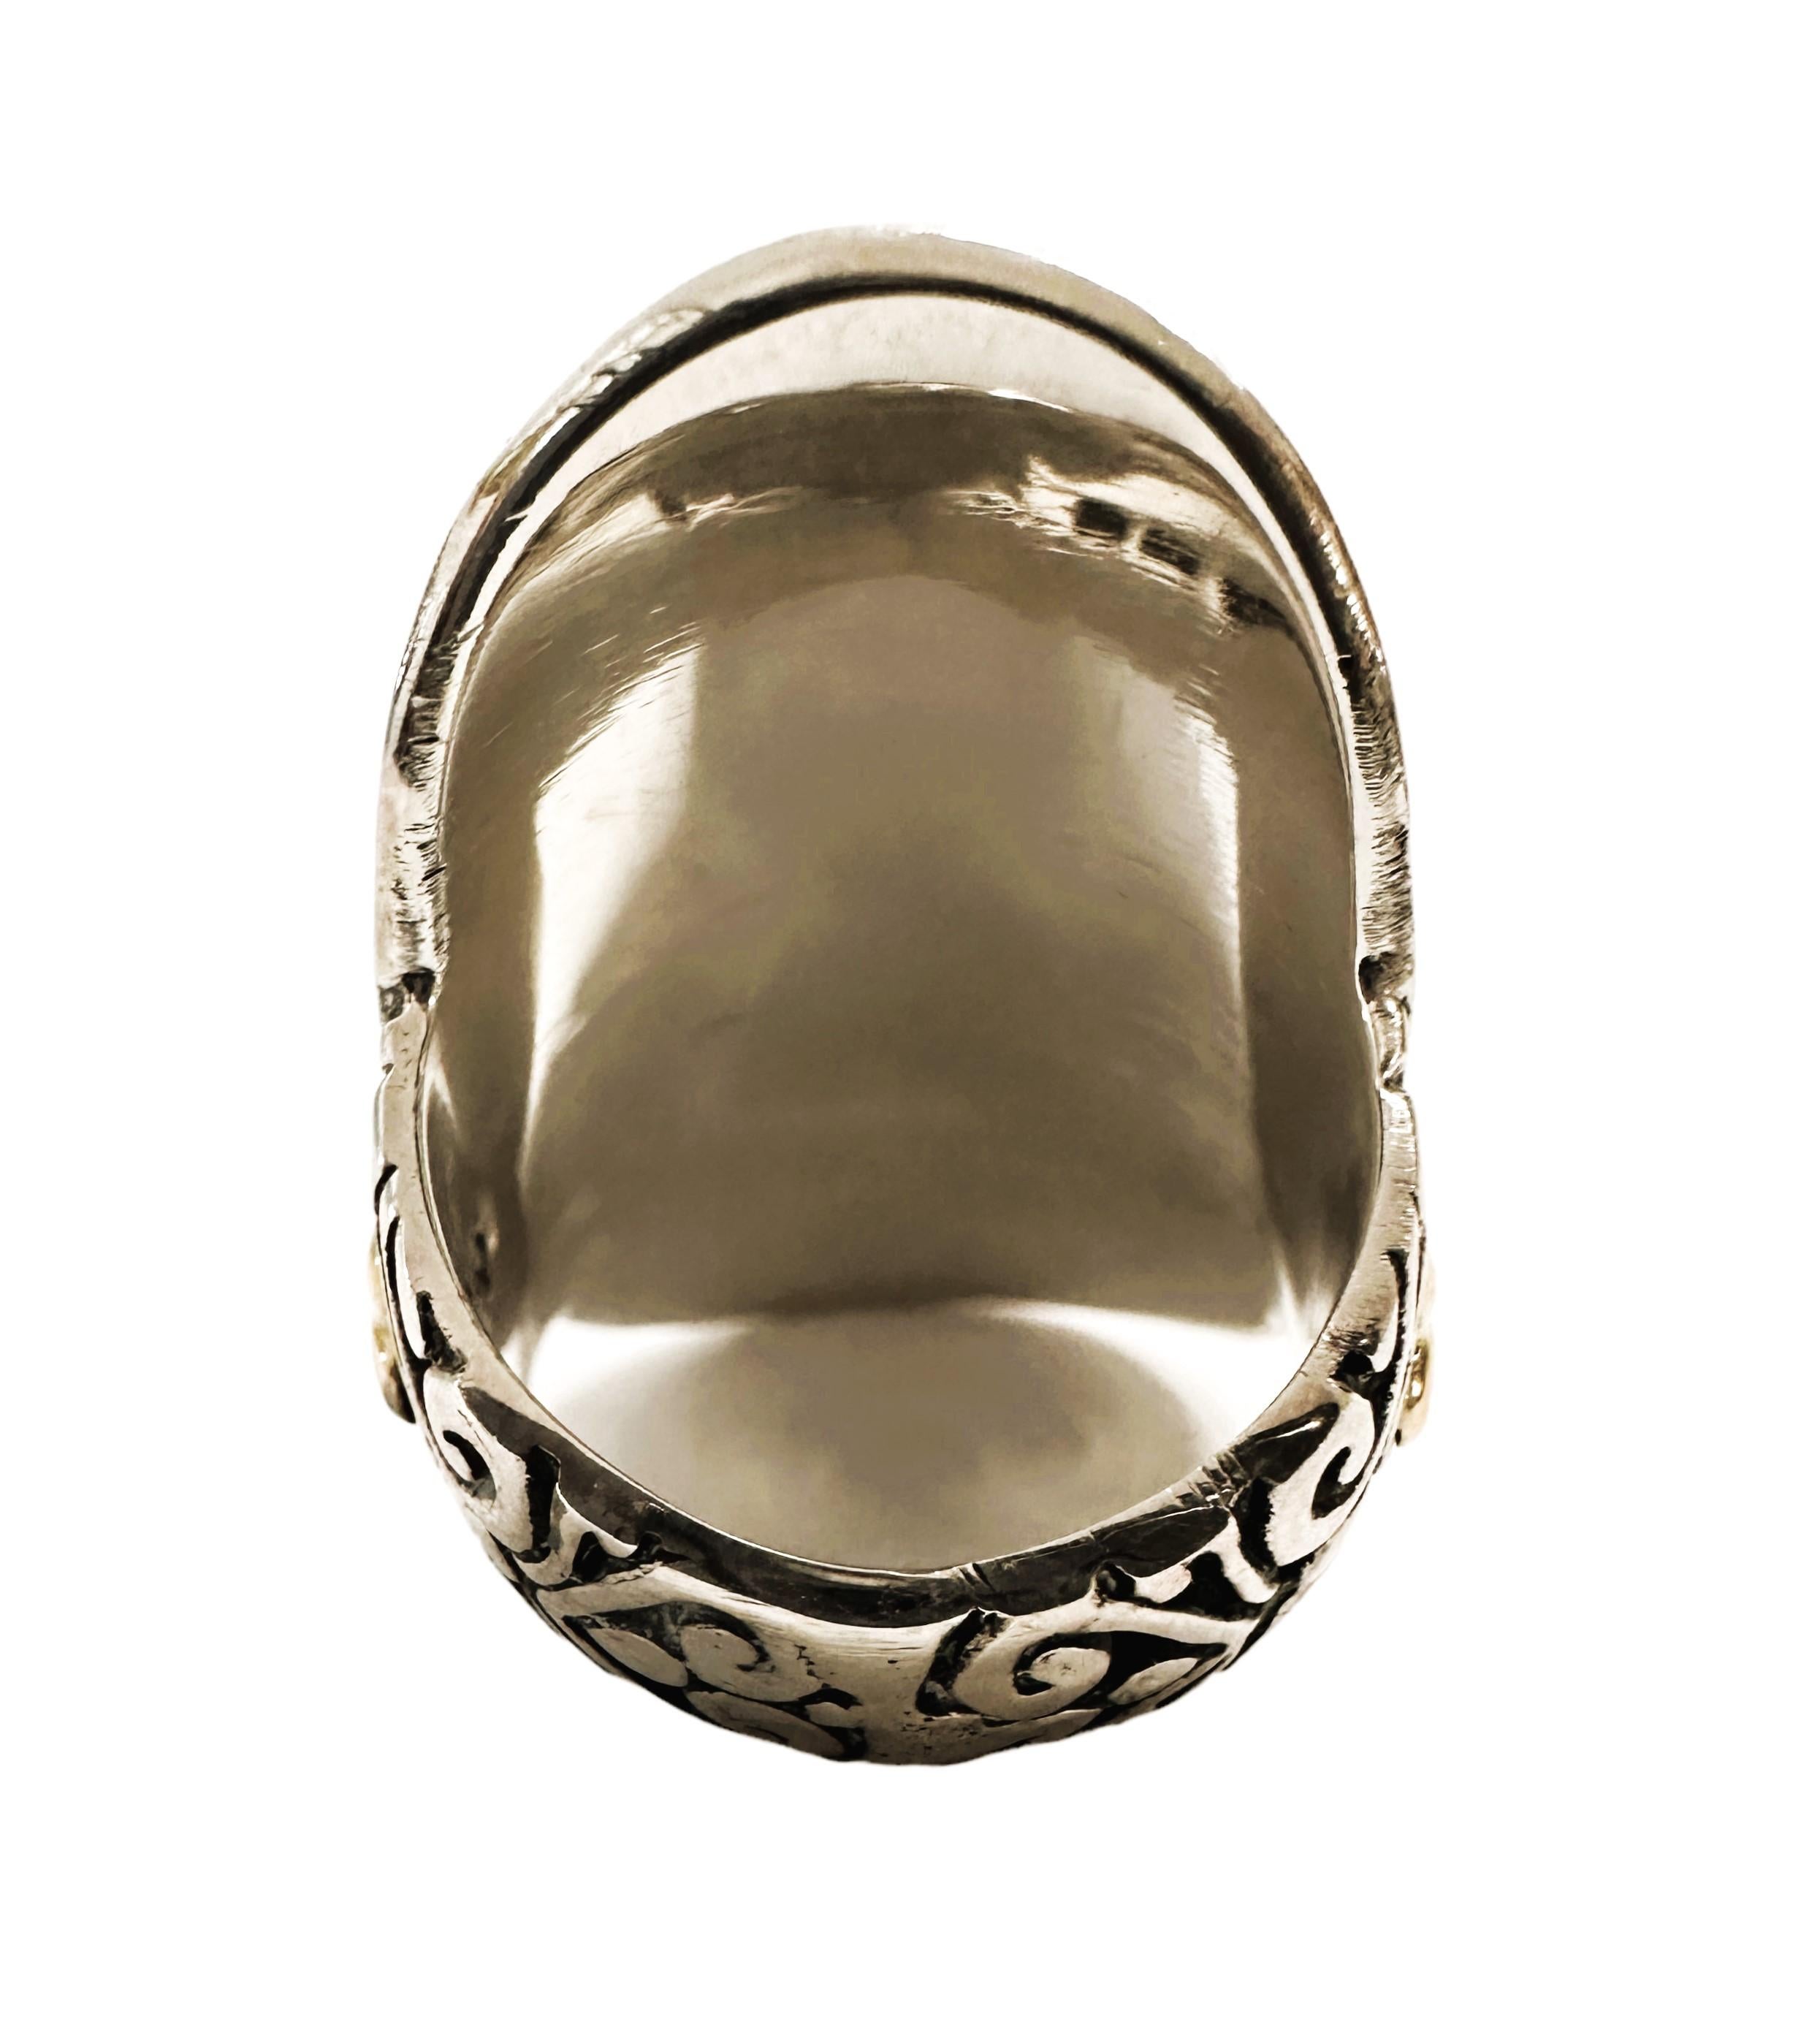 Samuel B 18K Gold 925 Sterling Silver Hammered Artisan Ring Size 6.5 In Excellent Condition For Sale In Eagan, MN